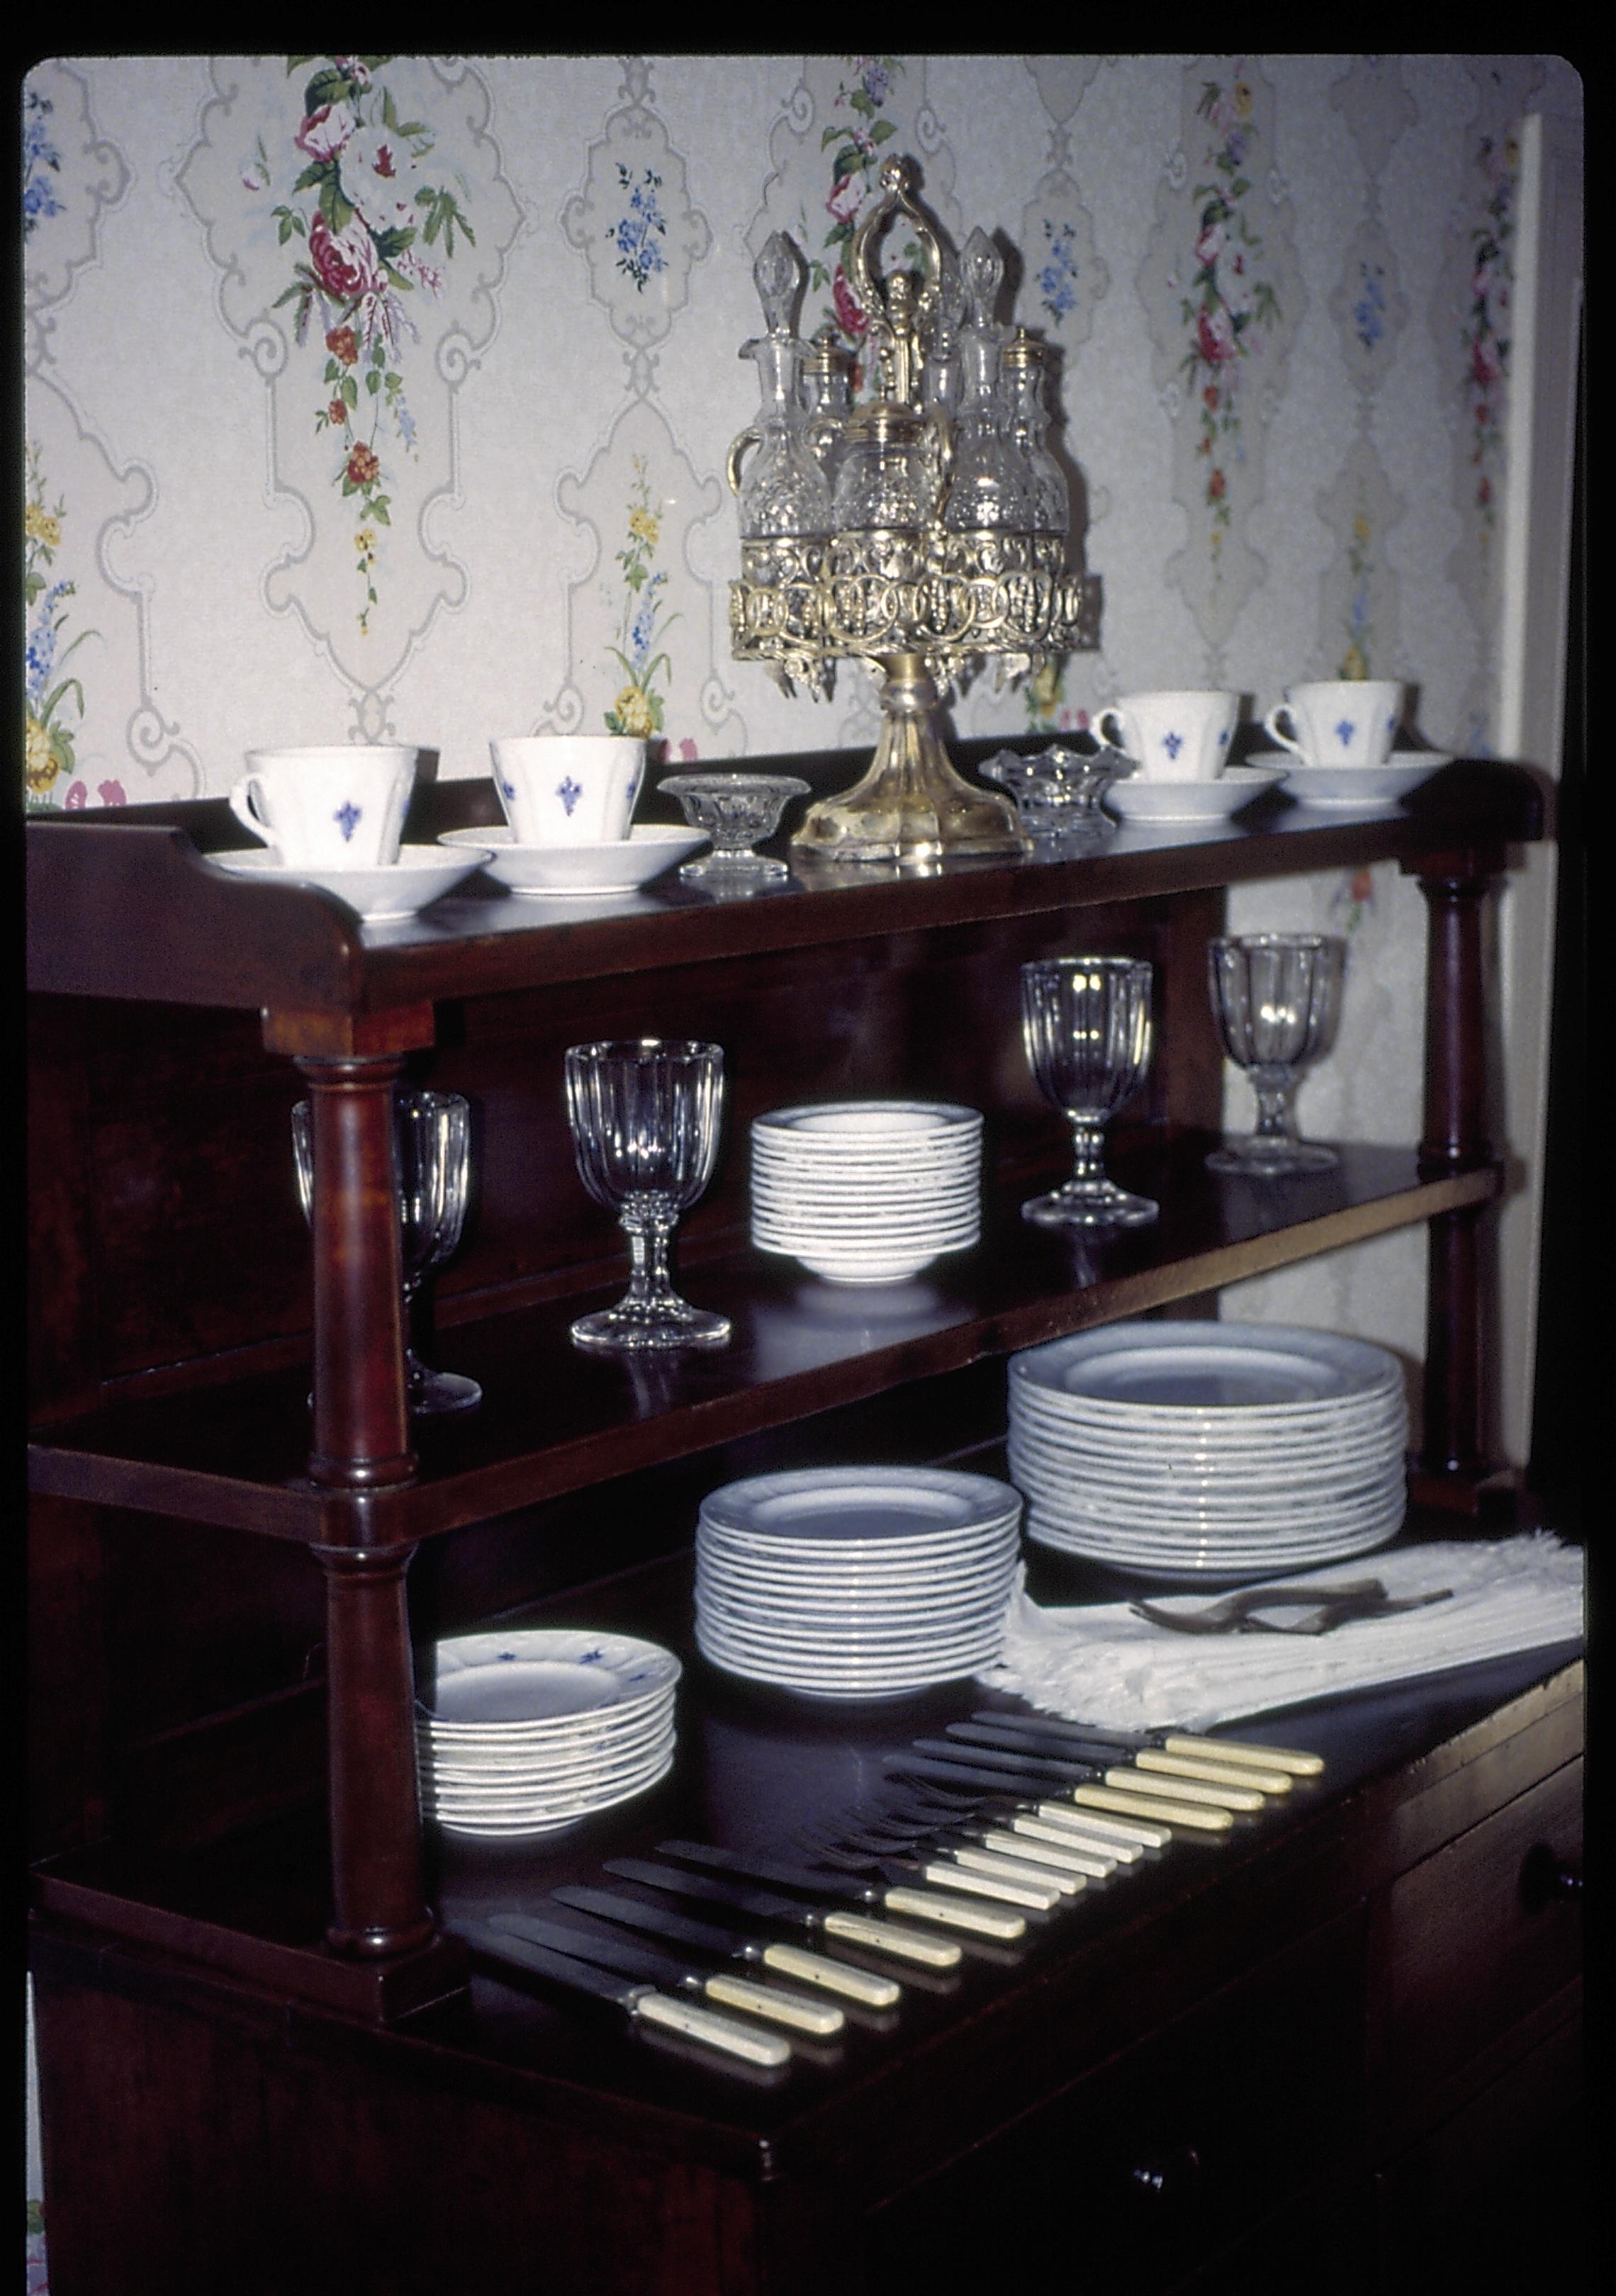 Sideboard with complete serving set for 12 displayed. Lincoln Home NHS- Christmas in Lincoln Home 1997, HS-20 Film Roll #17 Christmas, decorations